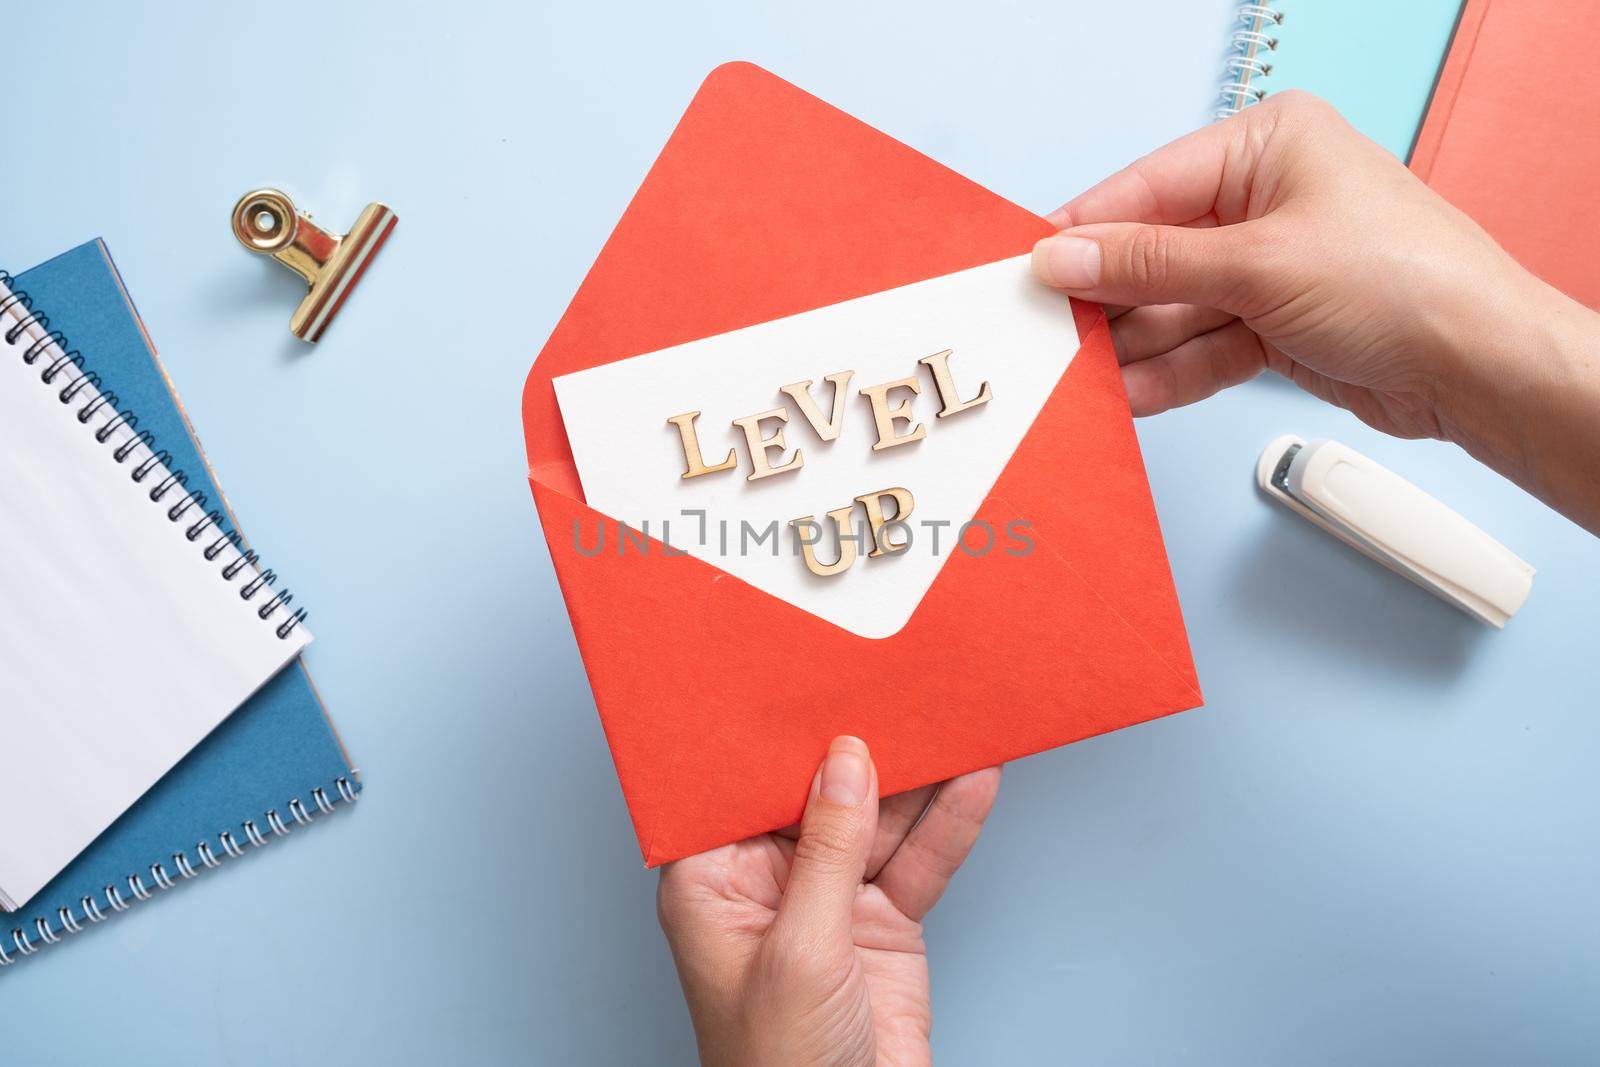 Level up inscription in the red envelope in female hands. Business and achievement concept by ssvimaliss